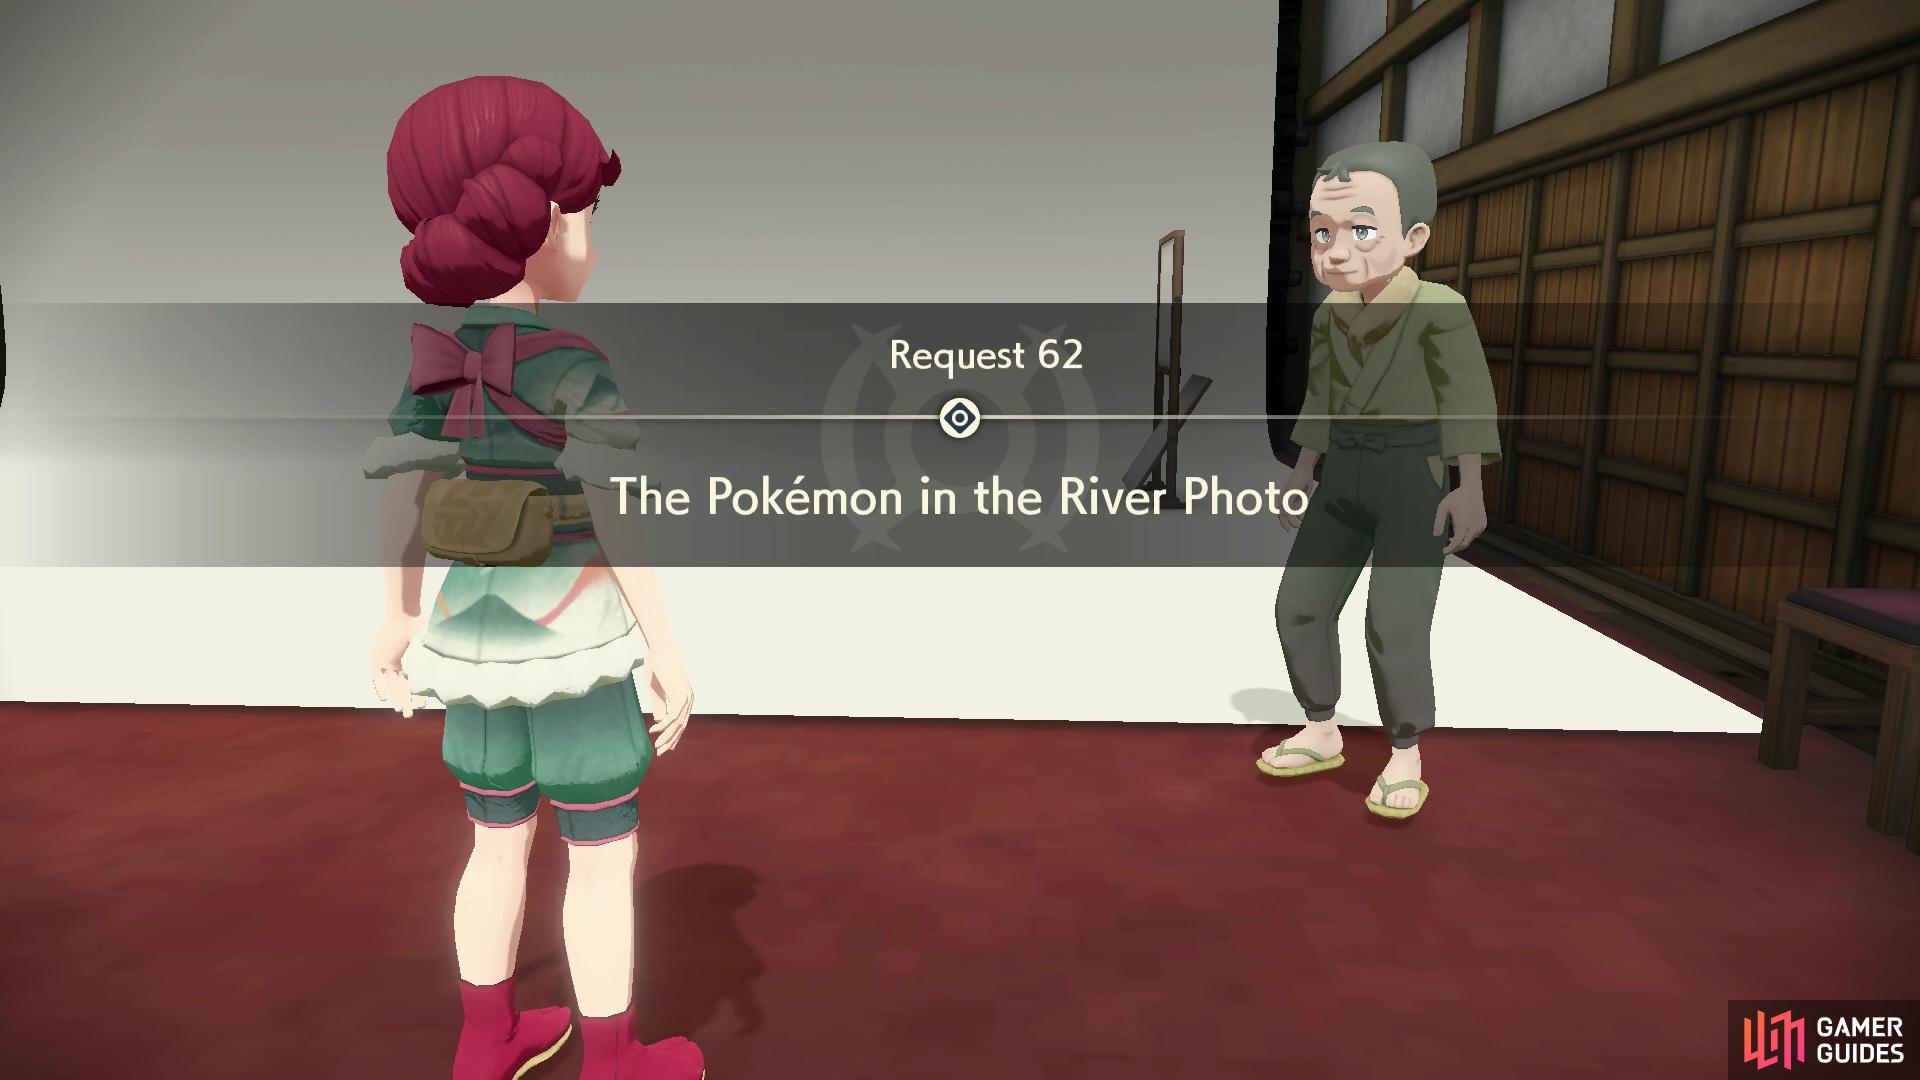 Request 62: The Pokémon in the River Photo.